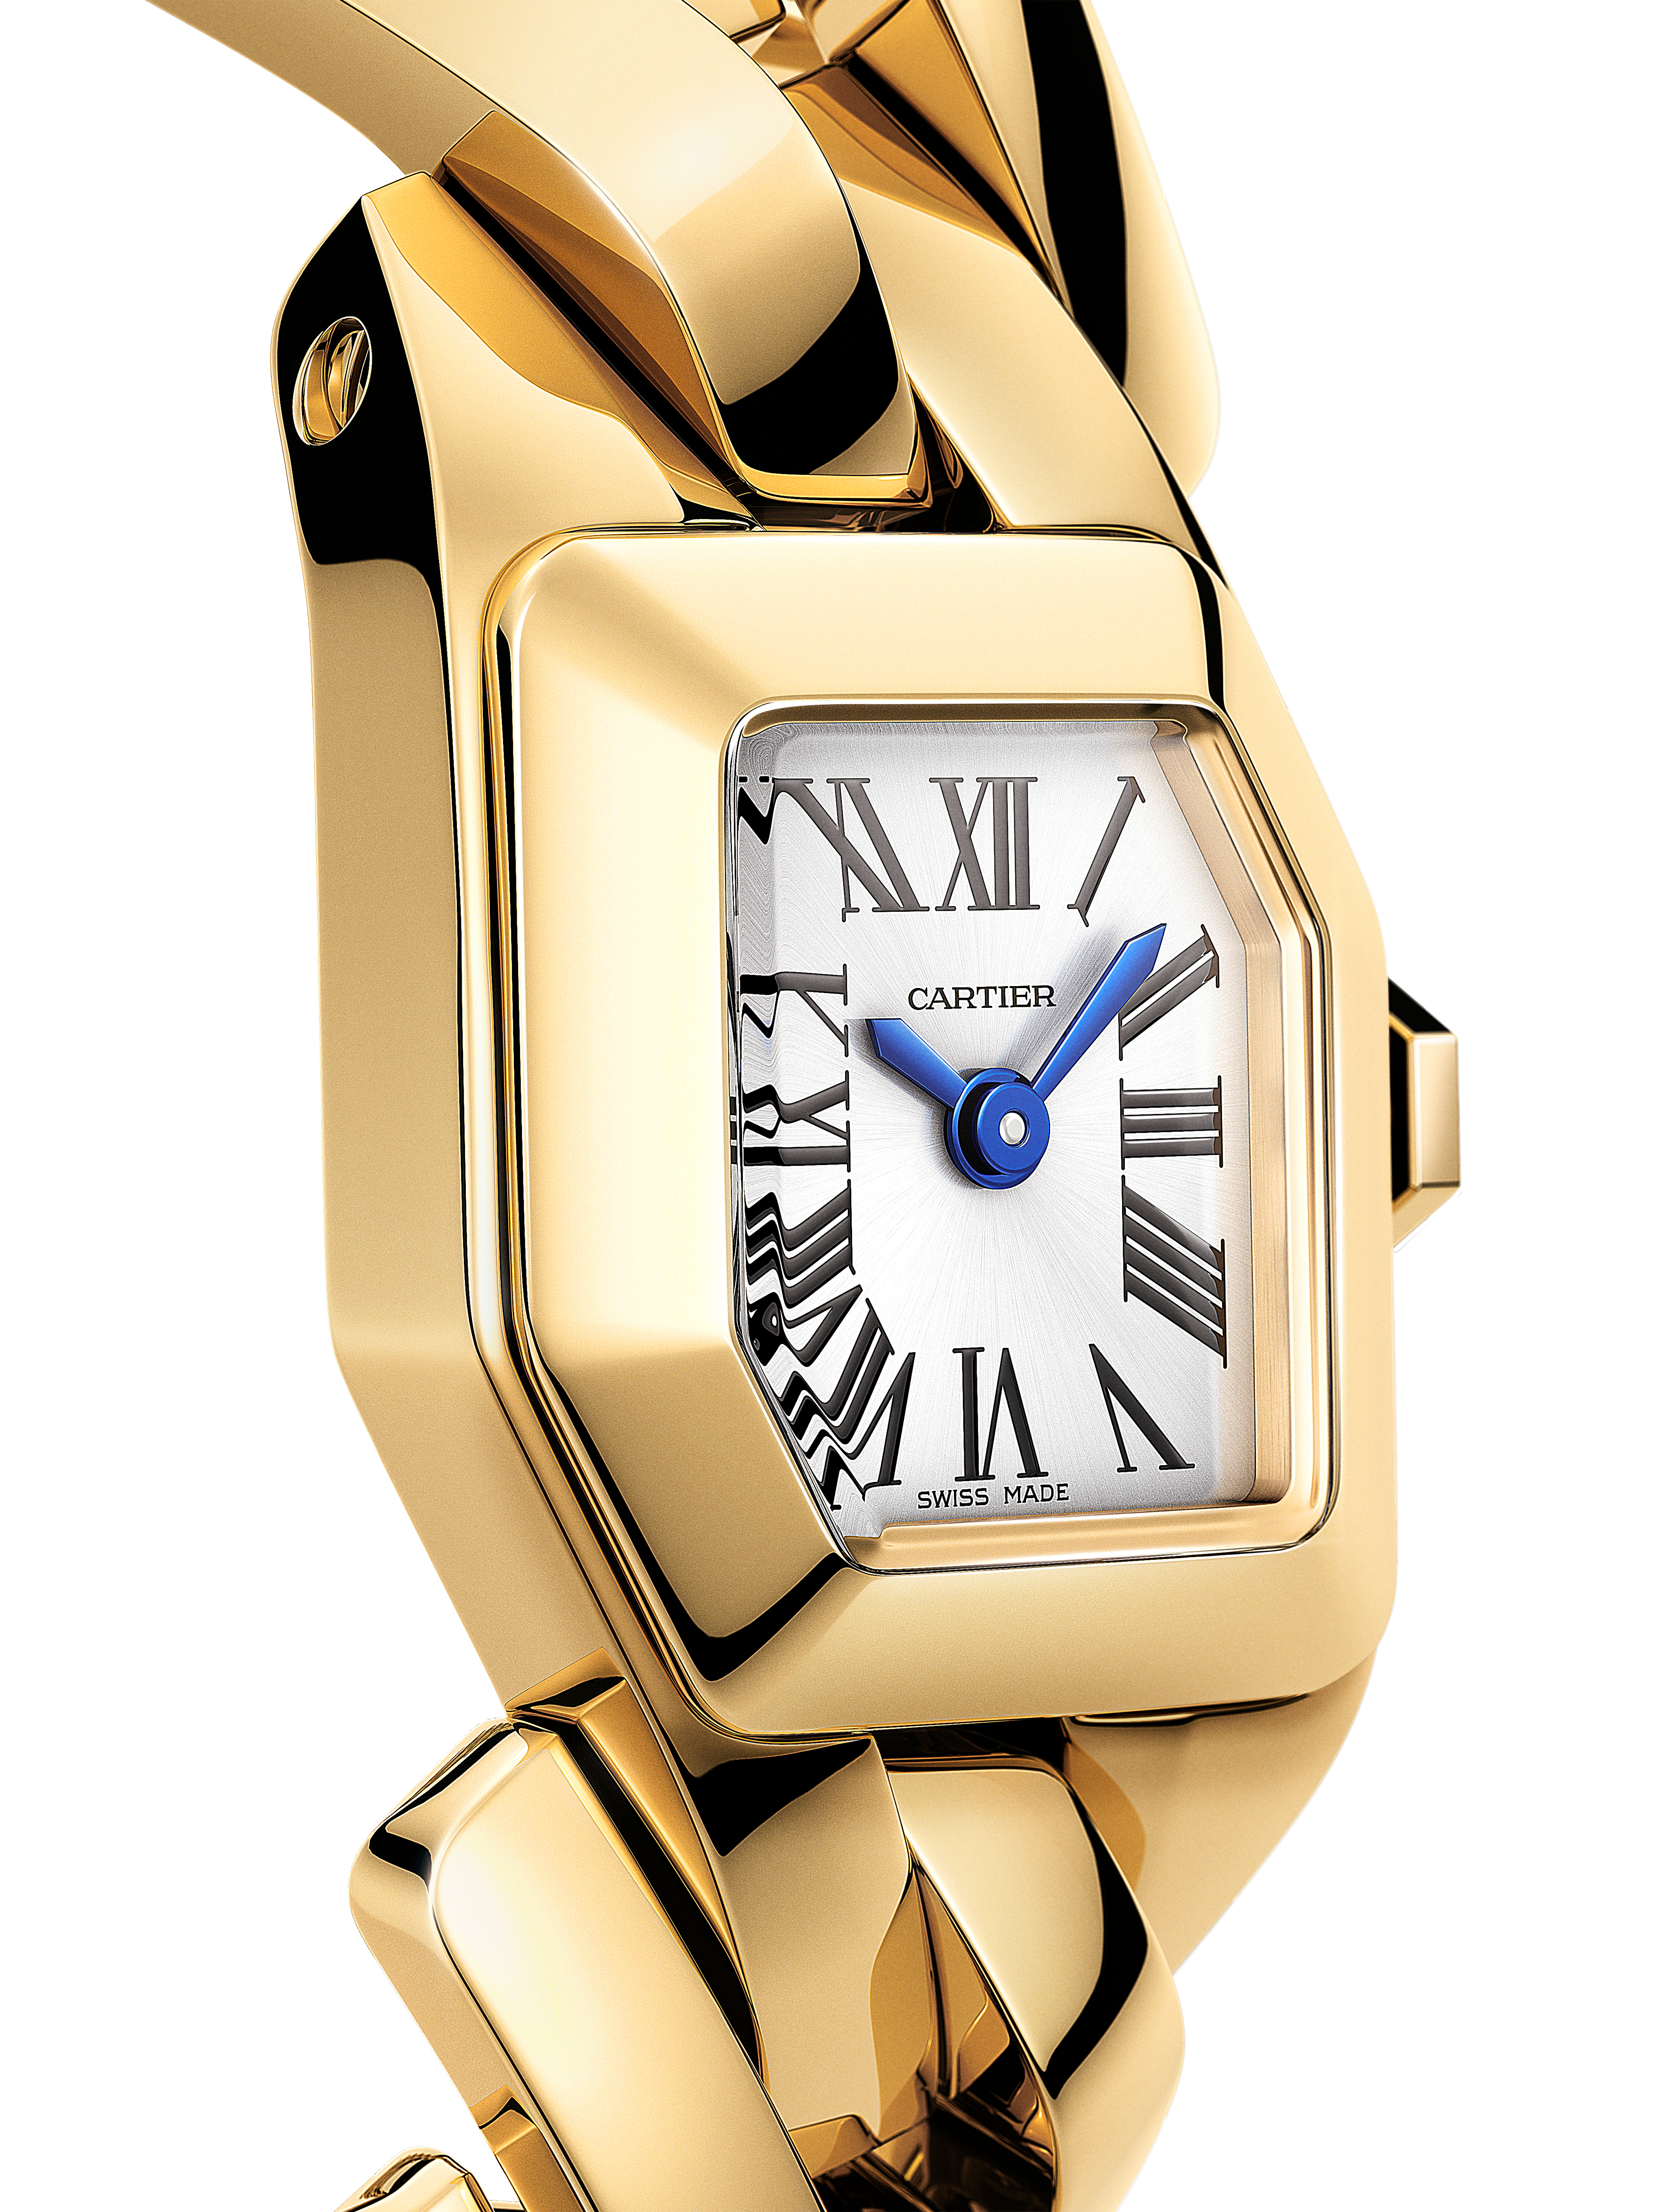 Cartier's new Maillon watch